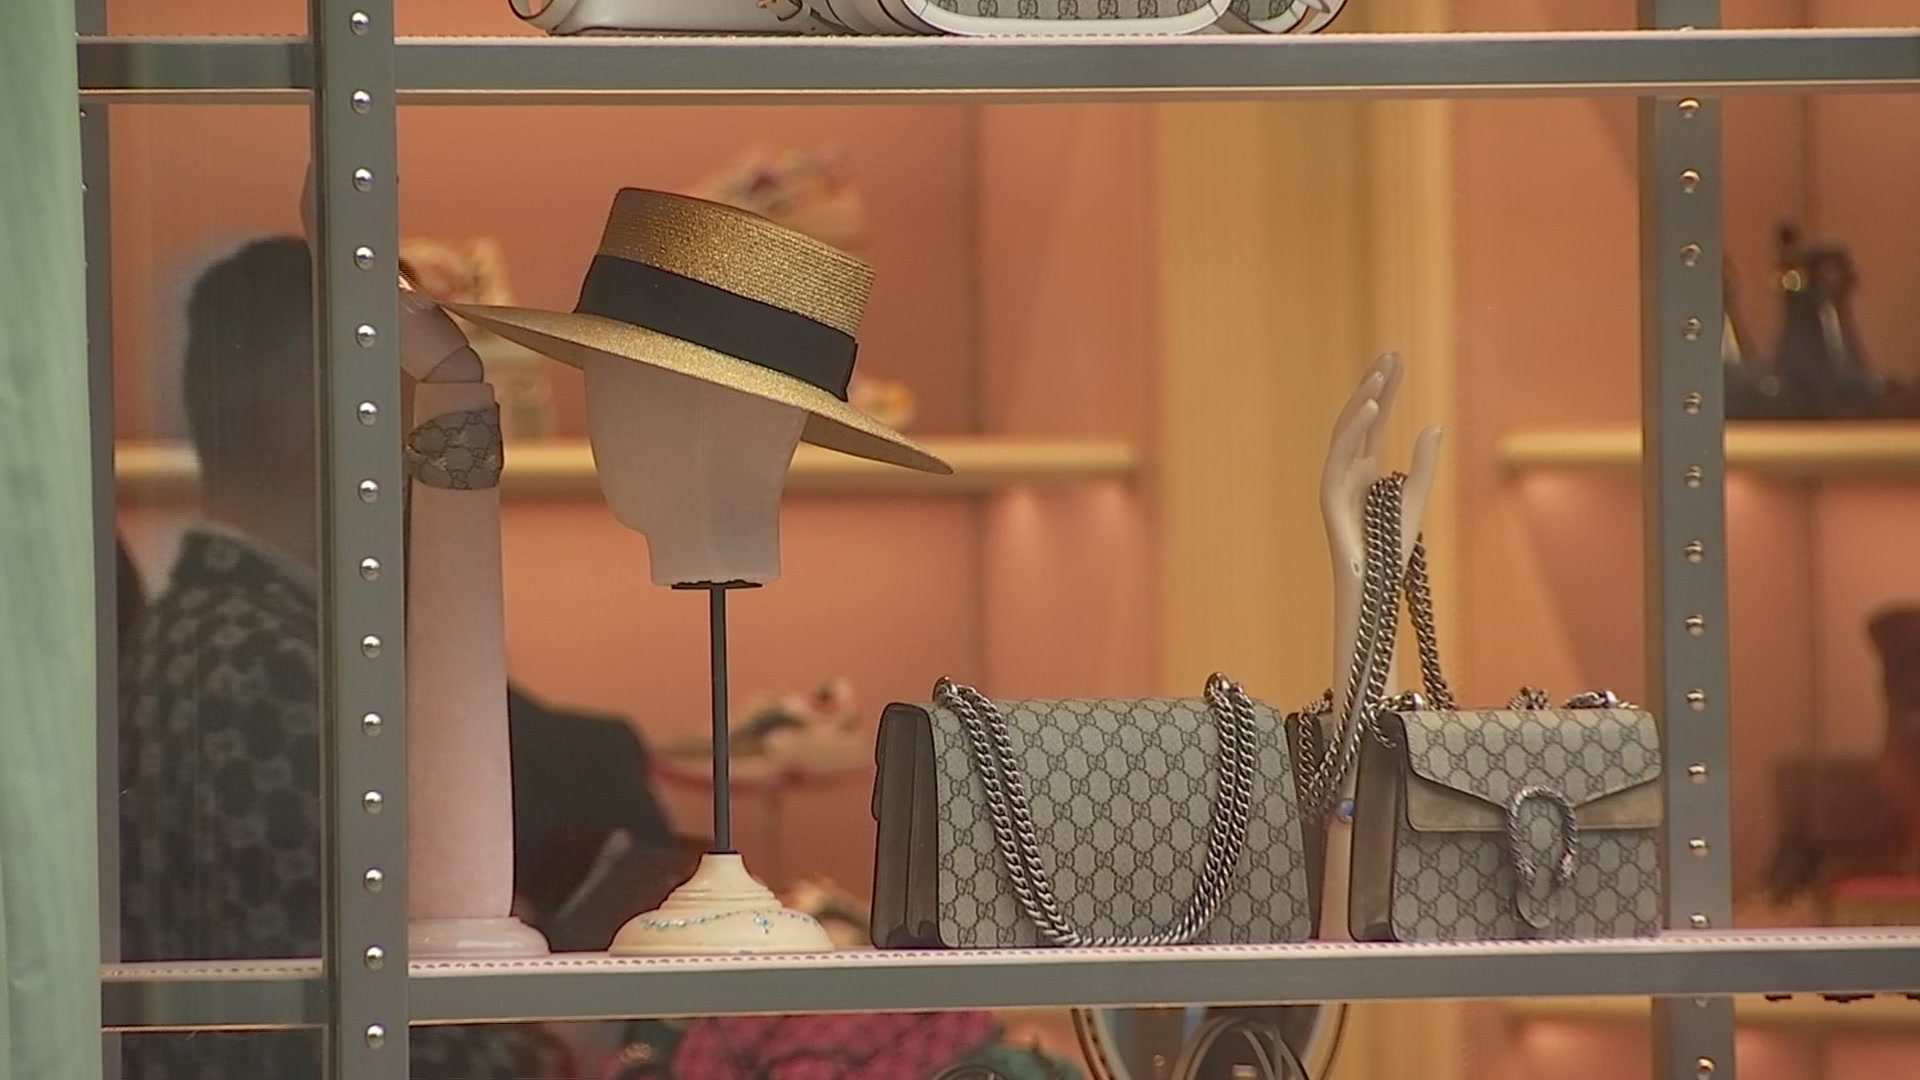 LOUIS VUITTON OPENS NEW STORE IN PLANO'S LEGACY WEST DEVELOPMENT